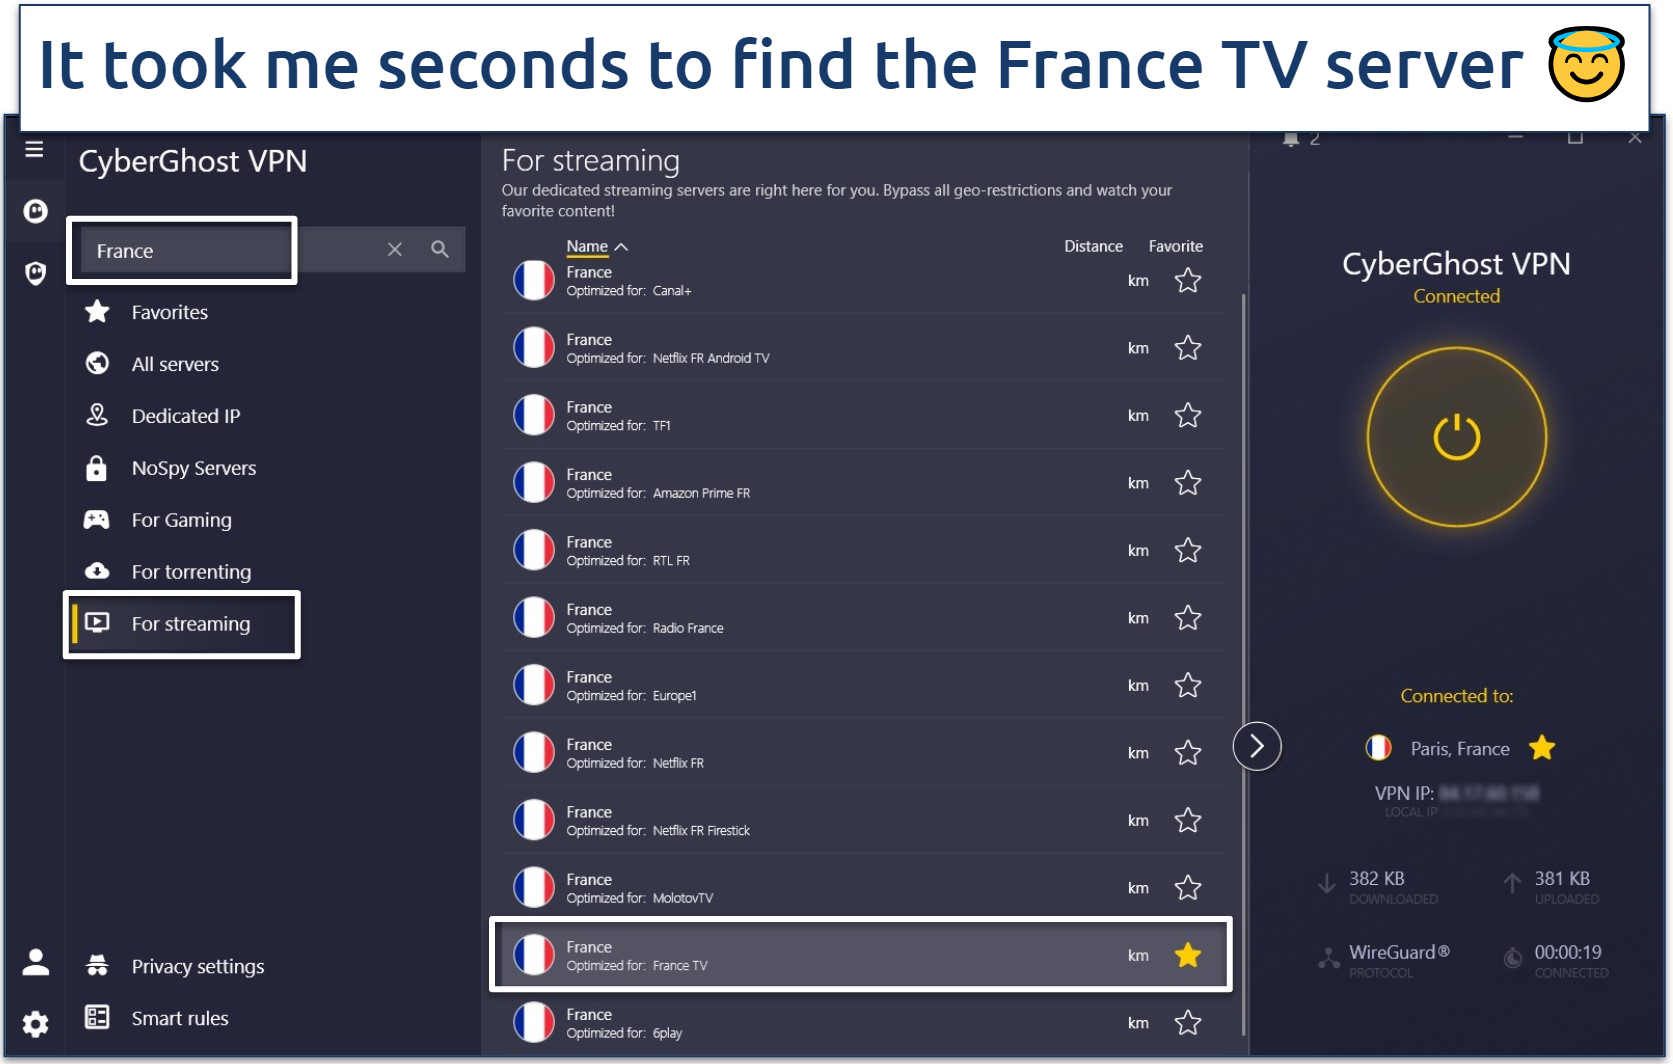 A screenshot of CyberGhost's app interface with its French streaming servers.